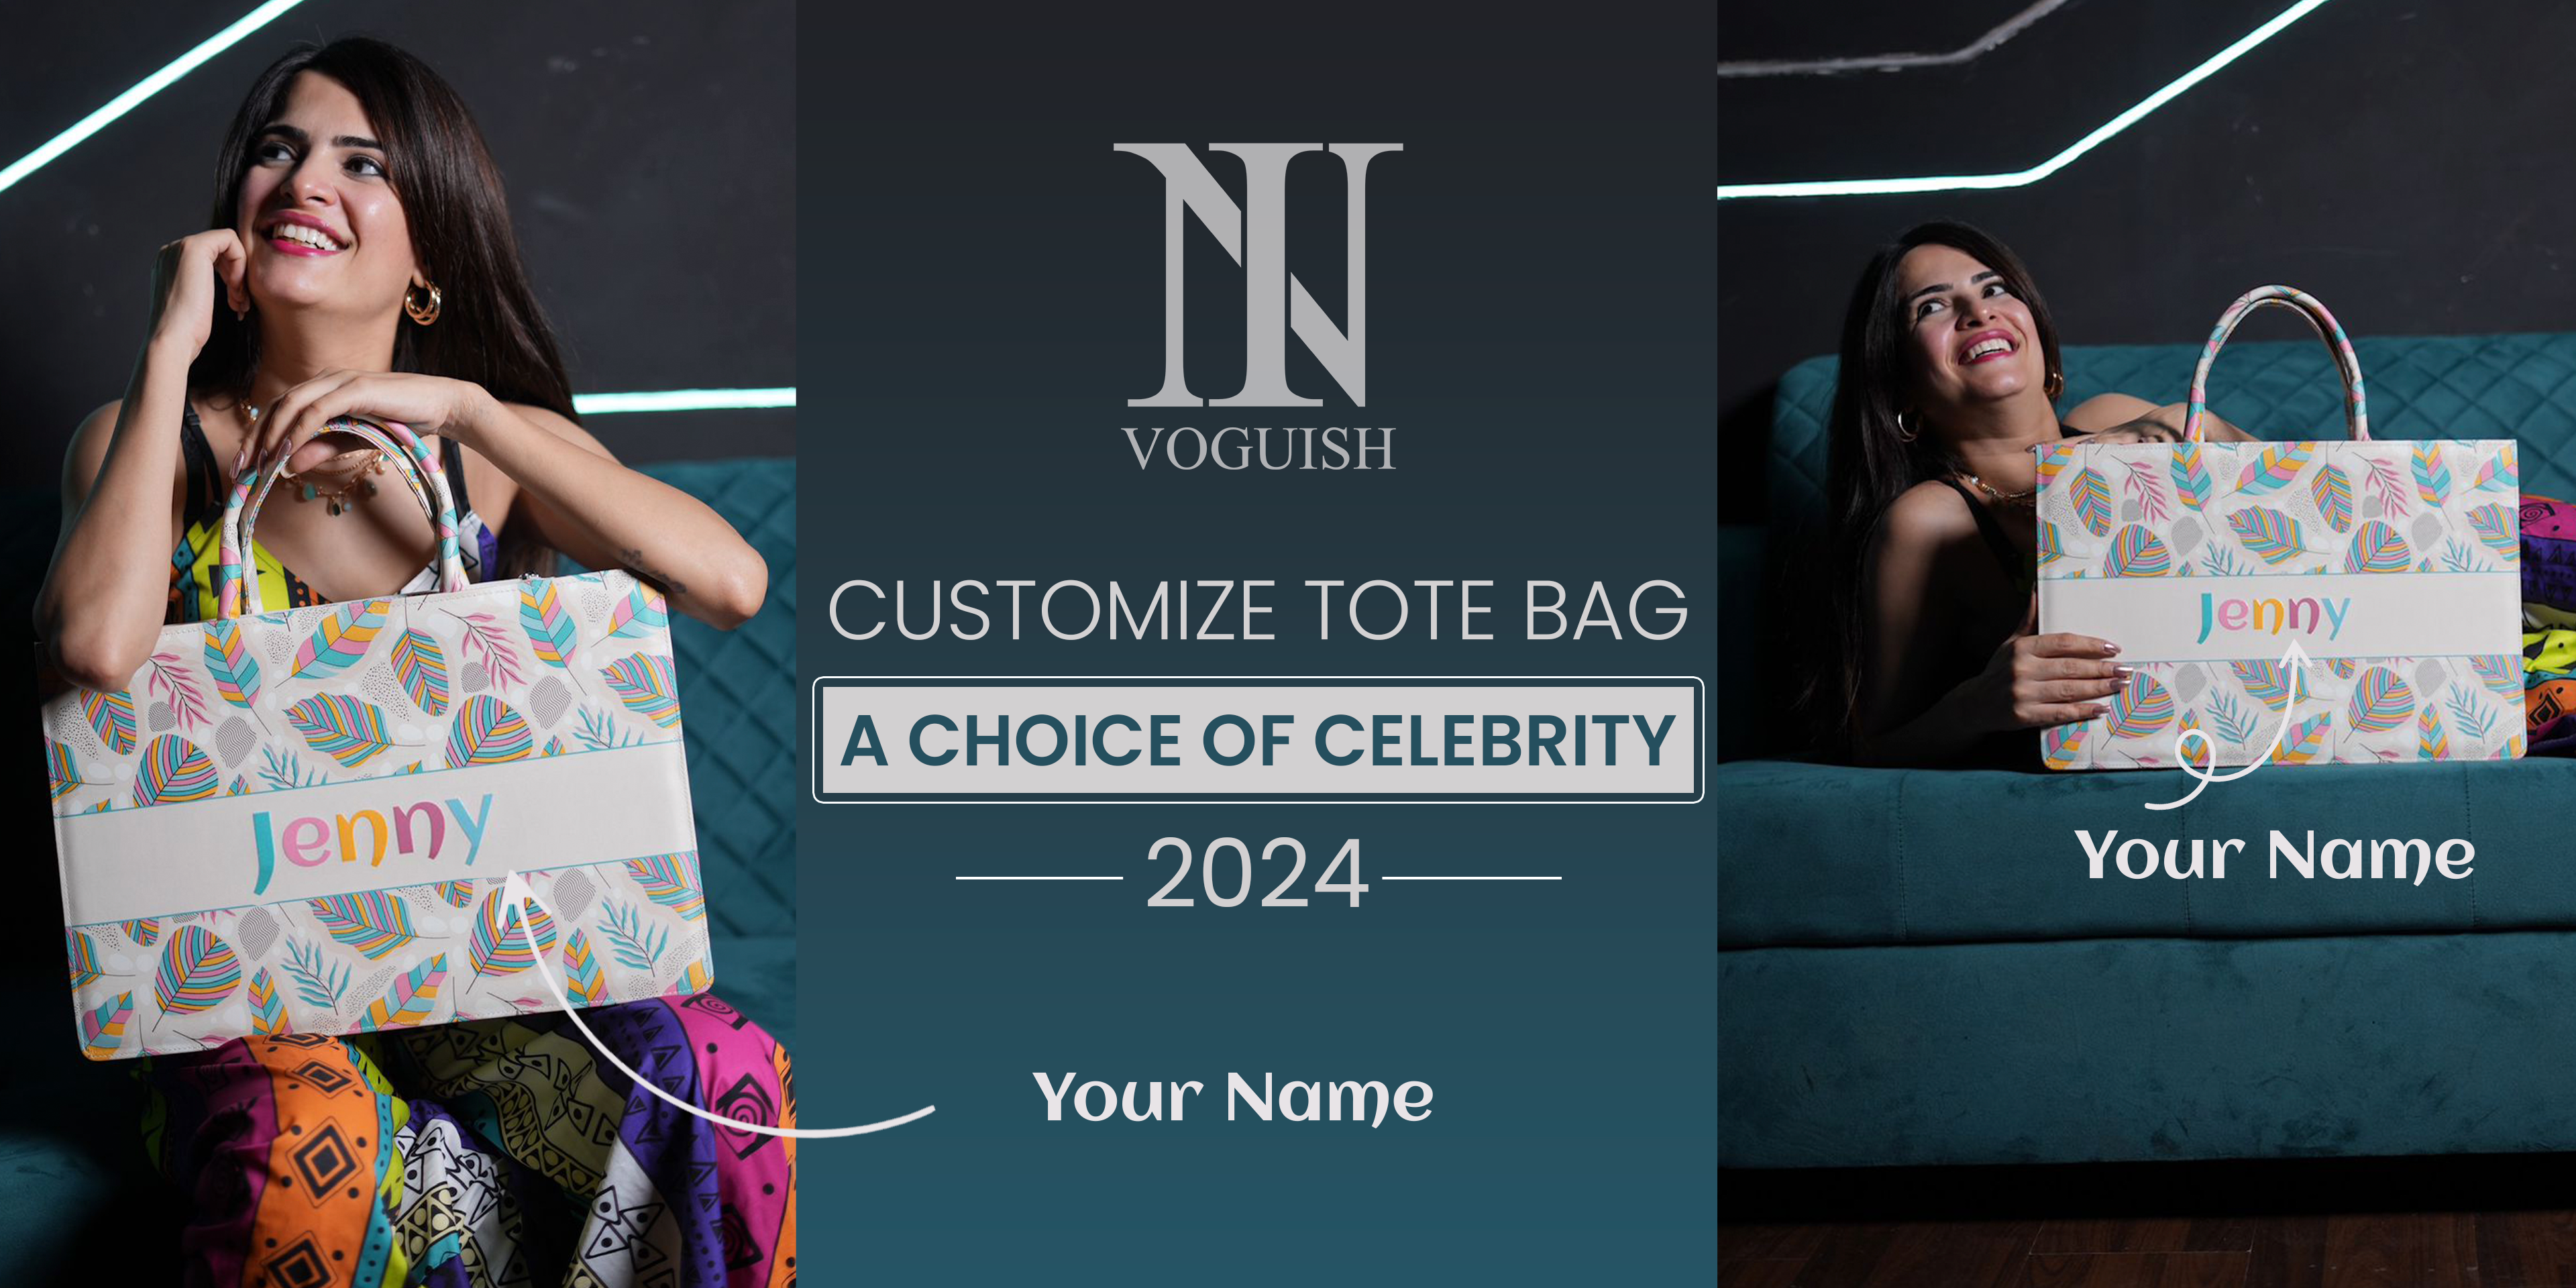 Customized tote bag by In Voguish